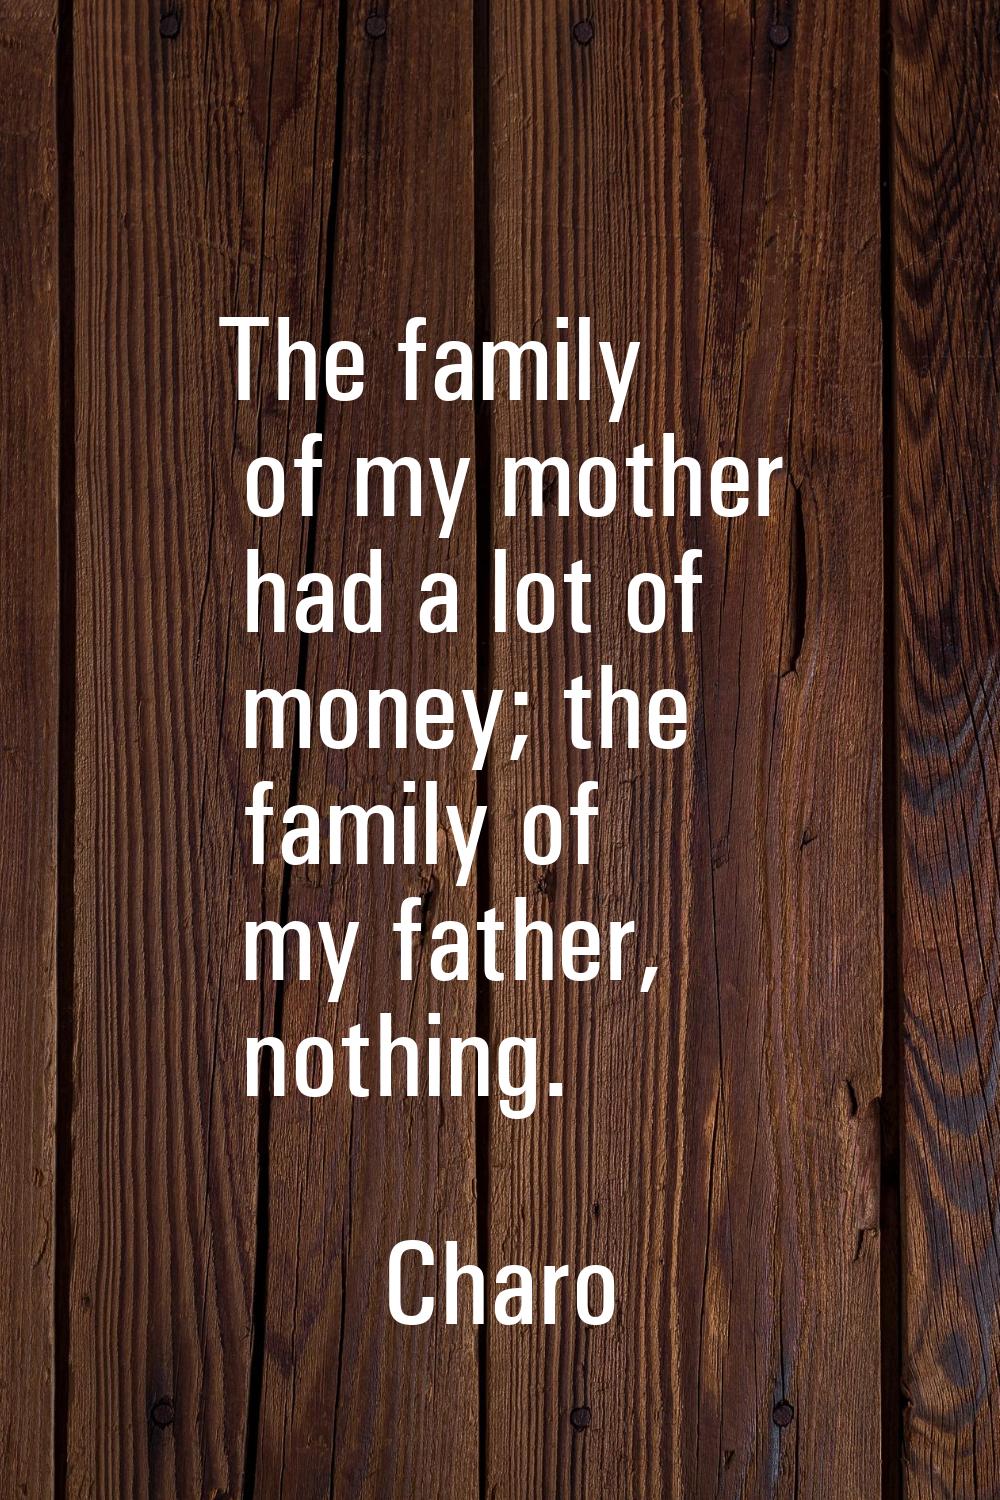 The family of my mother had a lot of money; the family of my father, nothing.